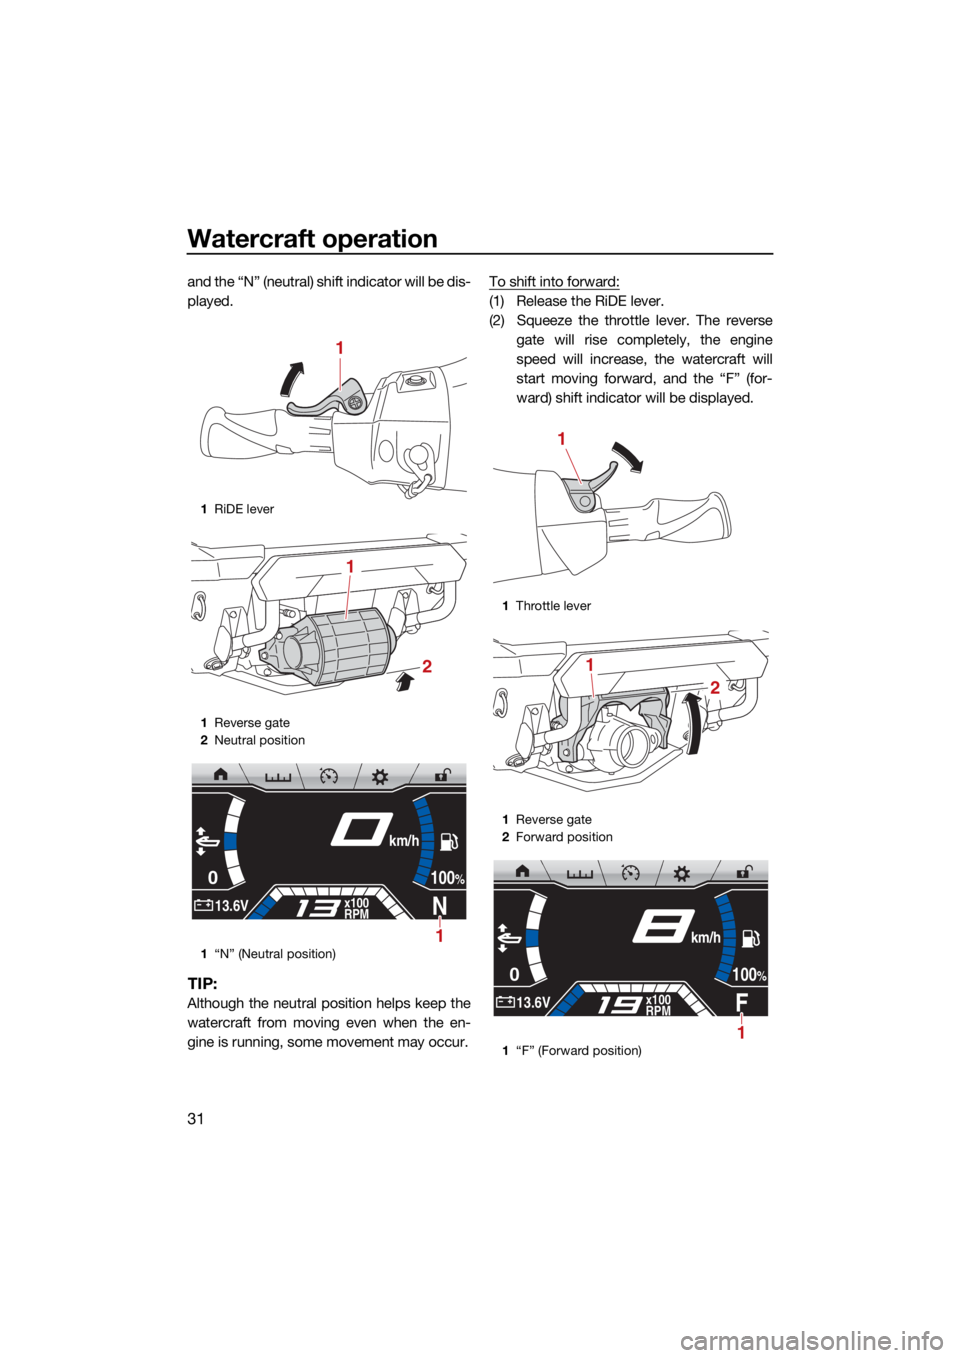 YAMAHA FX HO CRUISER 2021  Owners Manual Watercraft operation
31
and the “N” (neutral) shift indicator will be dis-
played.
TIP:
Although the neutral position helps keep the
watercraft from moving even when the en-
gine is running, some 